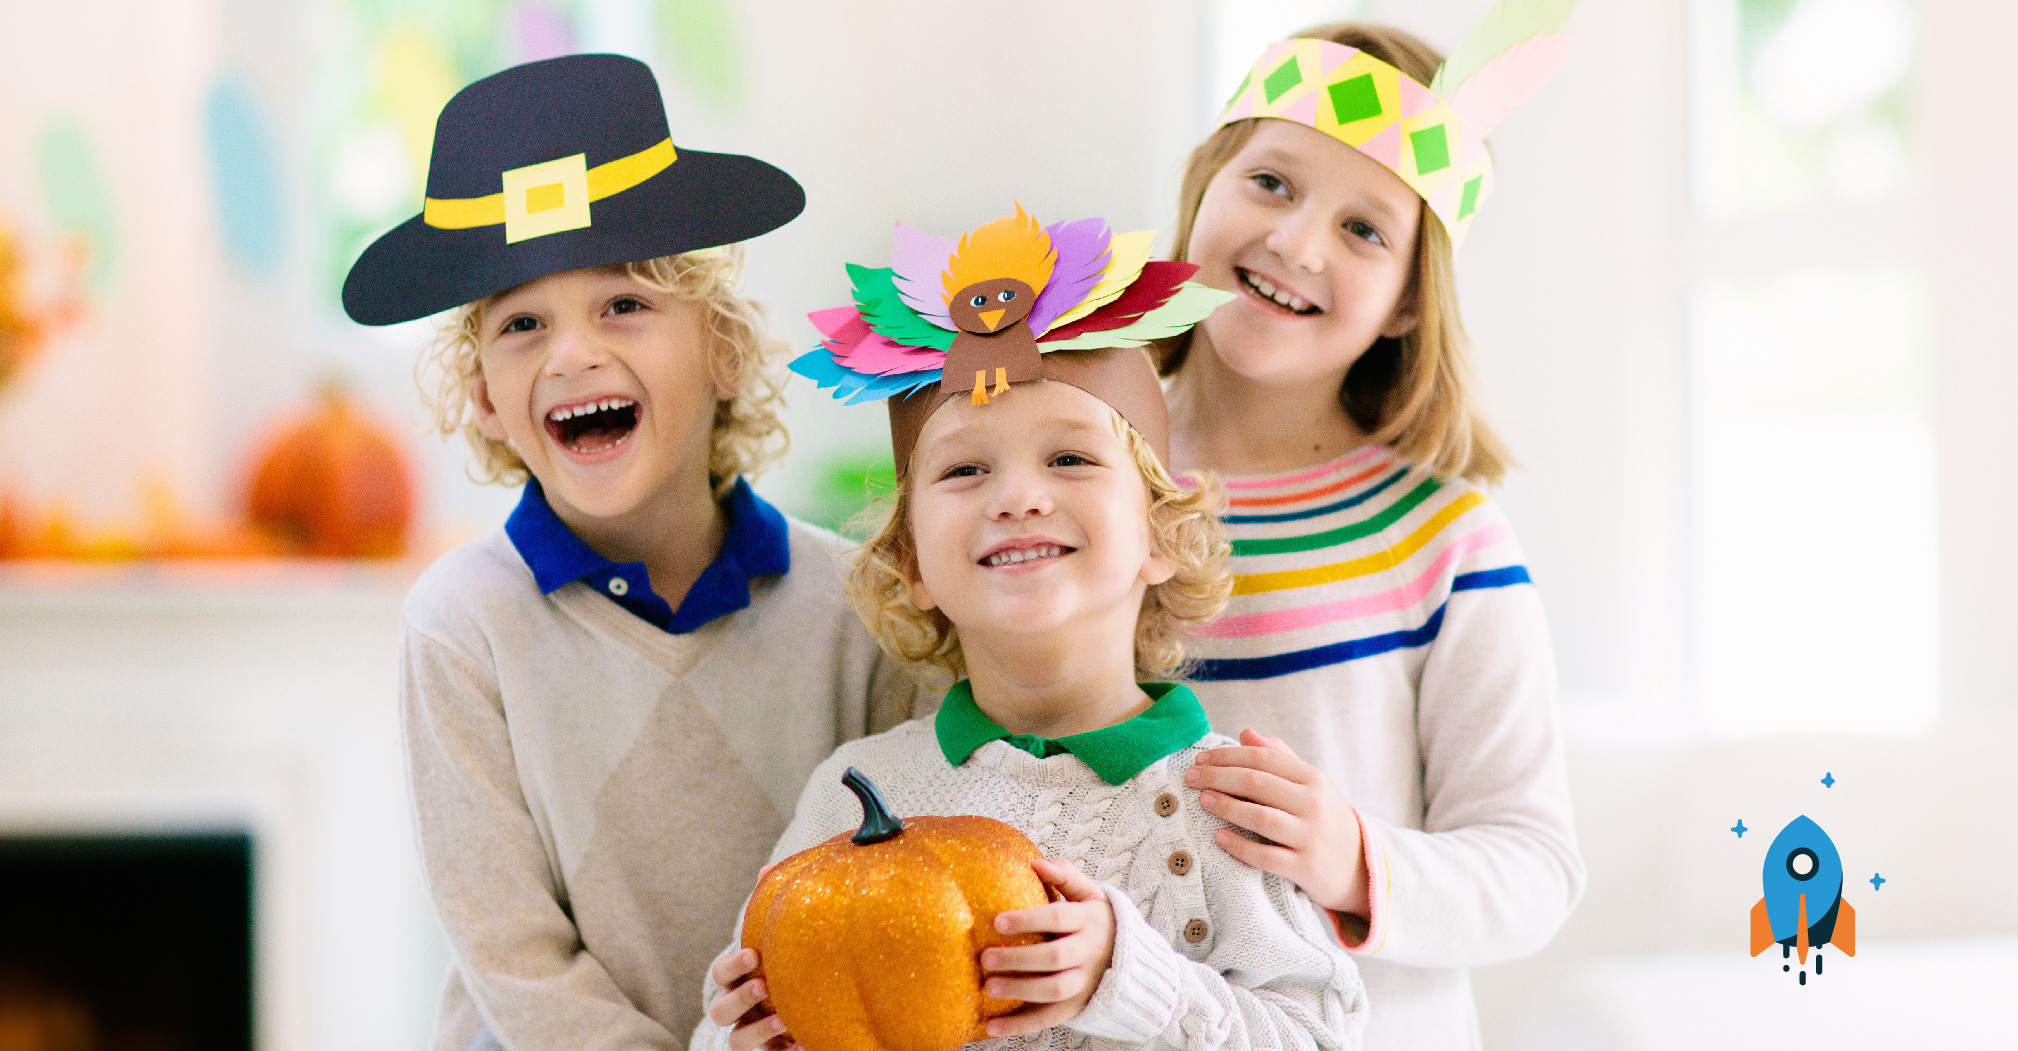 Family Games to Play This Thanksgiving by Planet Kids Learning Center